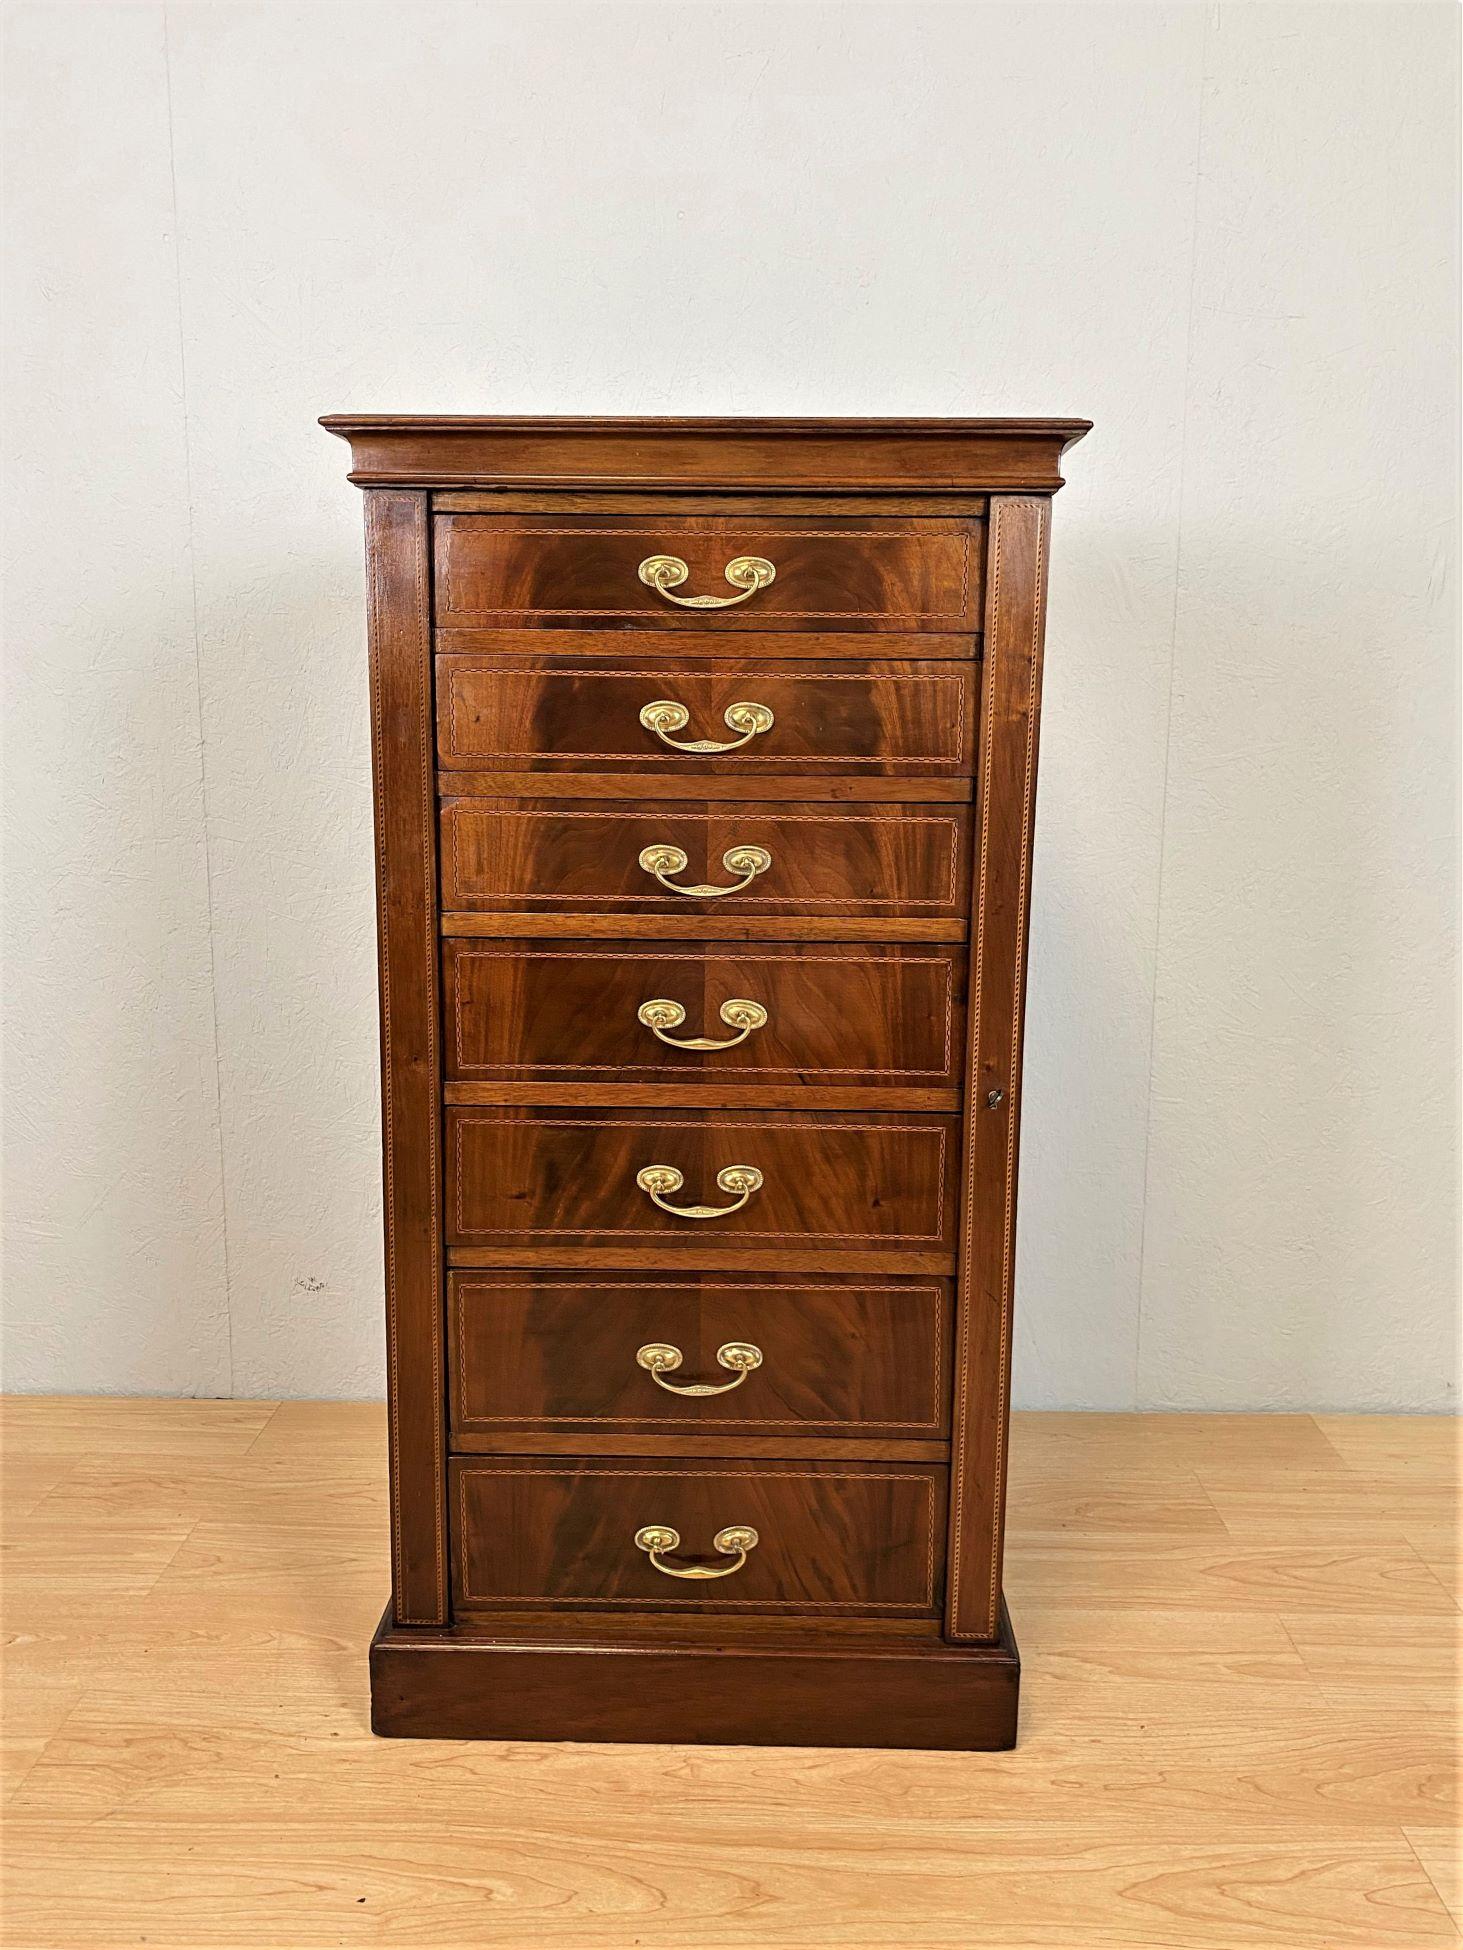 An Edwardian mahogany Wellington chest consisting of seven graduated oak lined drawers each furnished with a brass swan-neck handle.
The swinging locking arm enabling all the drawers to be locked with a single key.
The whole with geometric line